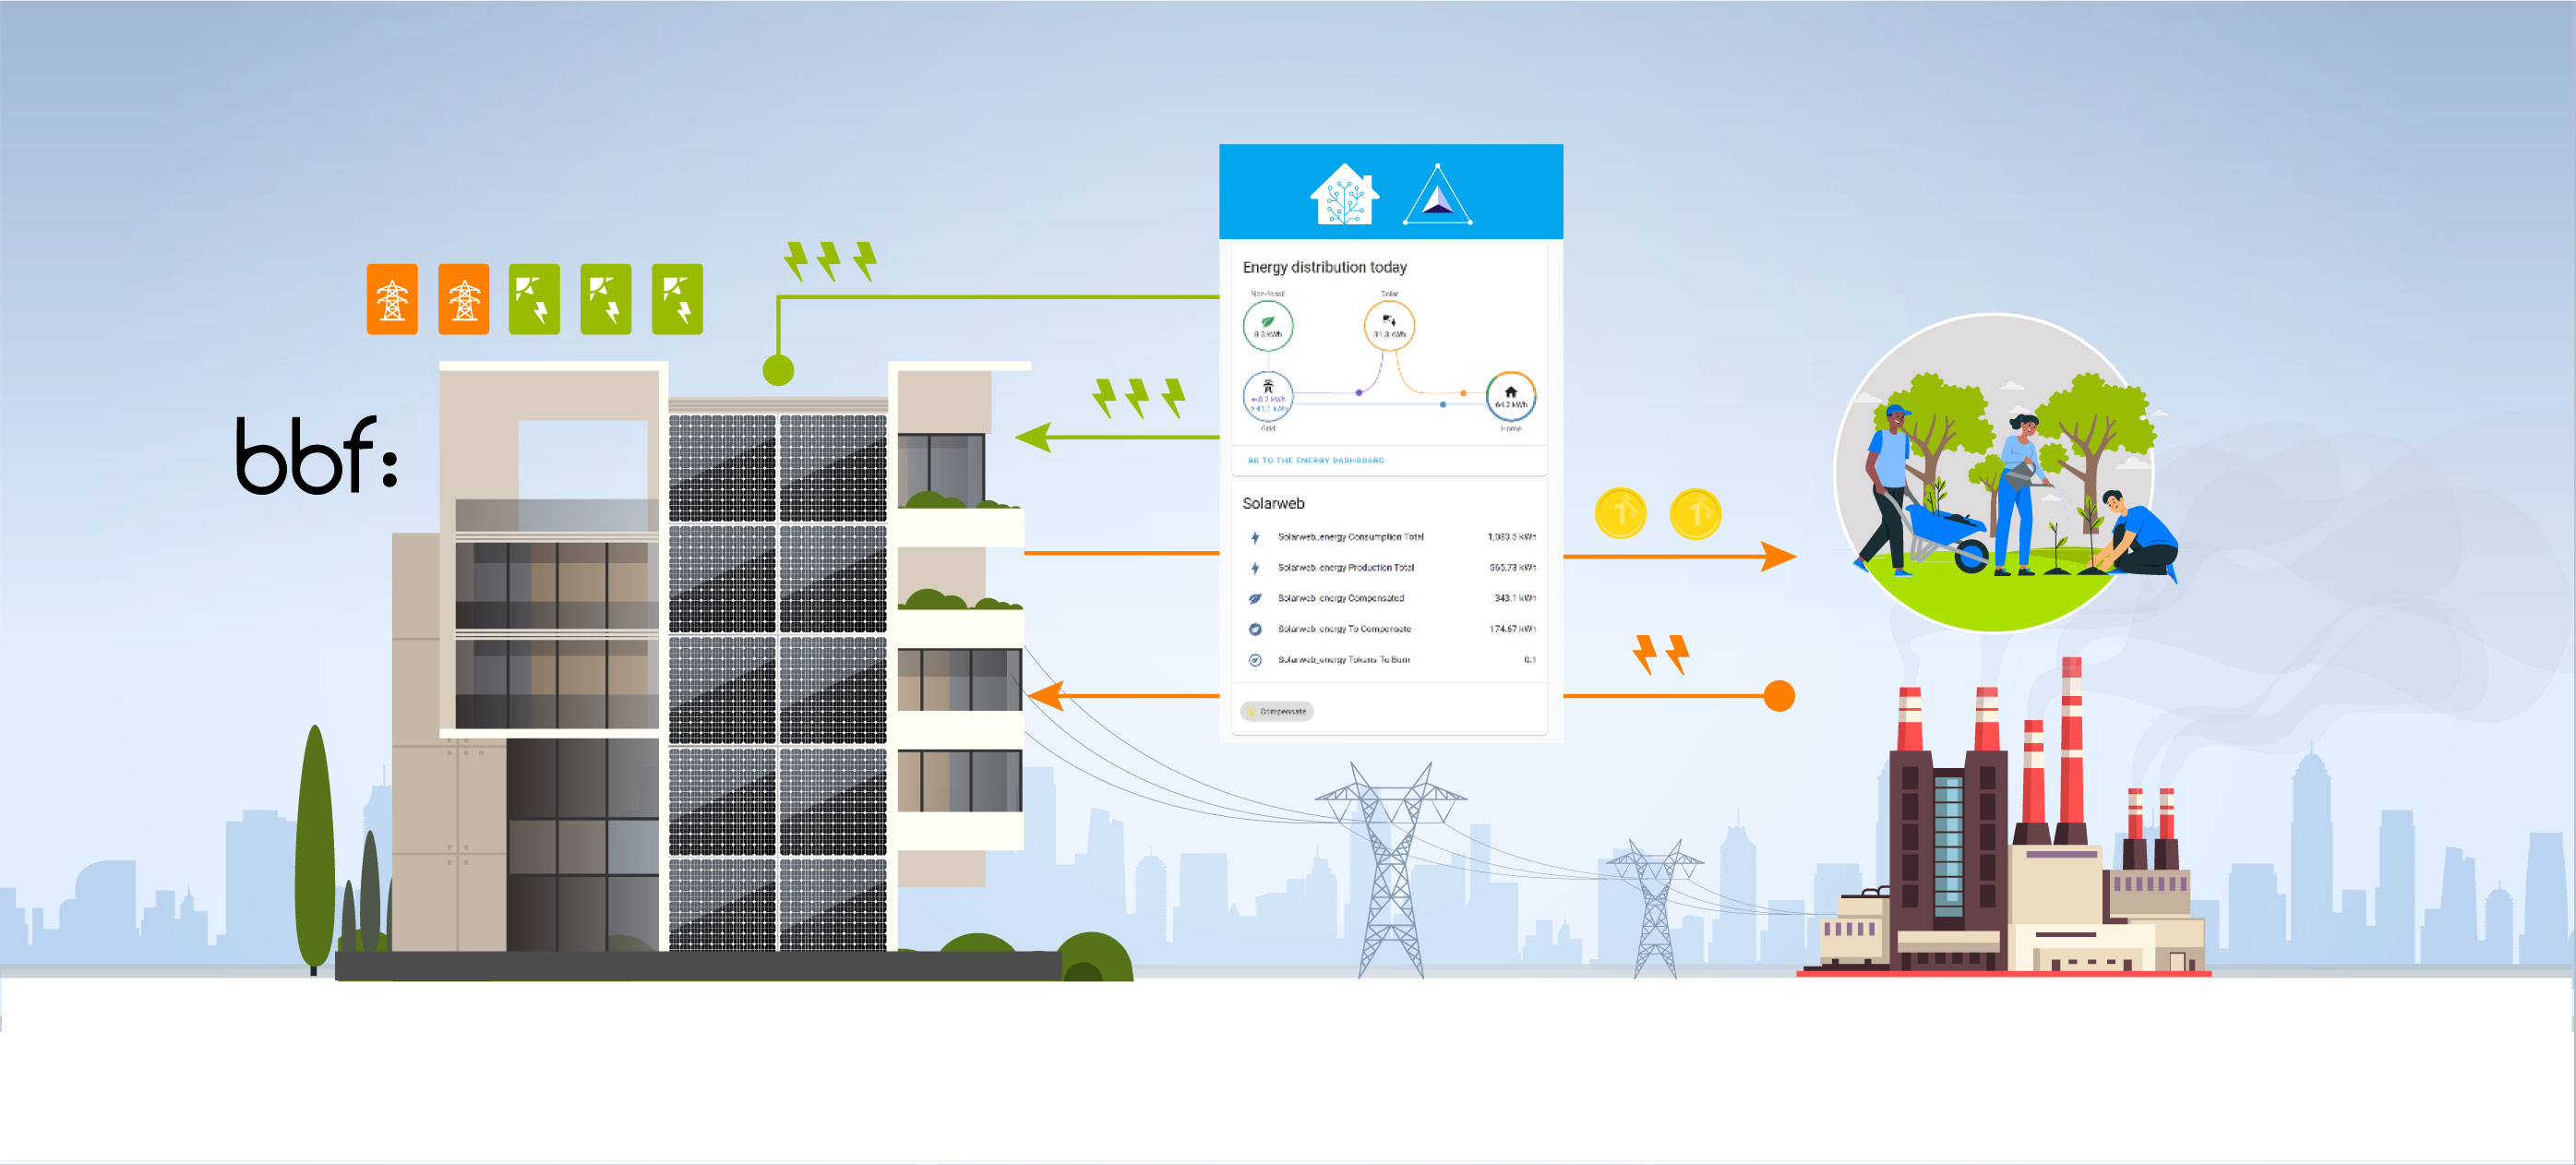 Fronius Solar.web integration with Home Assistant